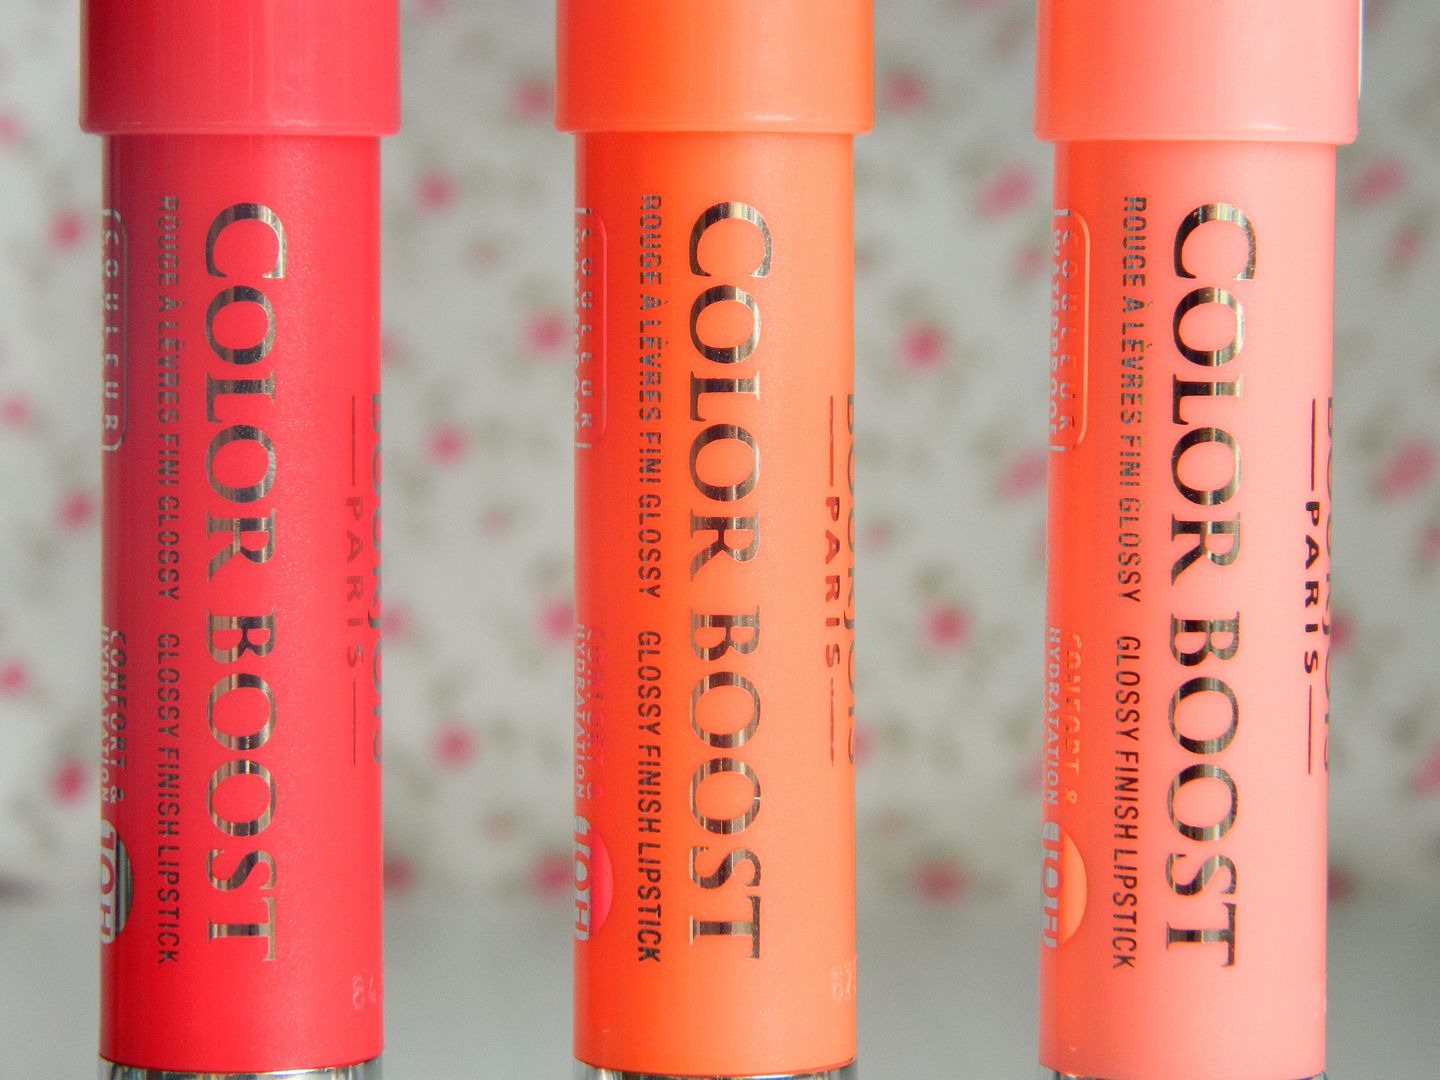 Bourjois Color Boost Lip Crayons Red Sunrise Orange Punch Peach On The Beach Close Up Packaging Review Belle-amie UK Beauty Fashion Lifestyle Blog